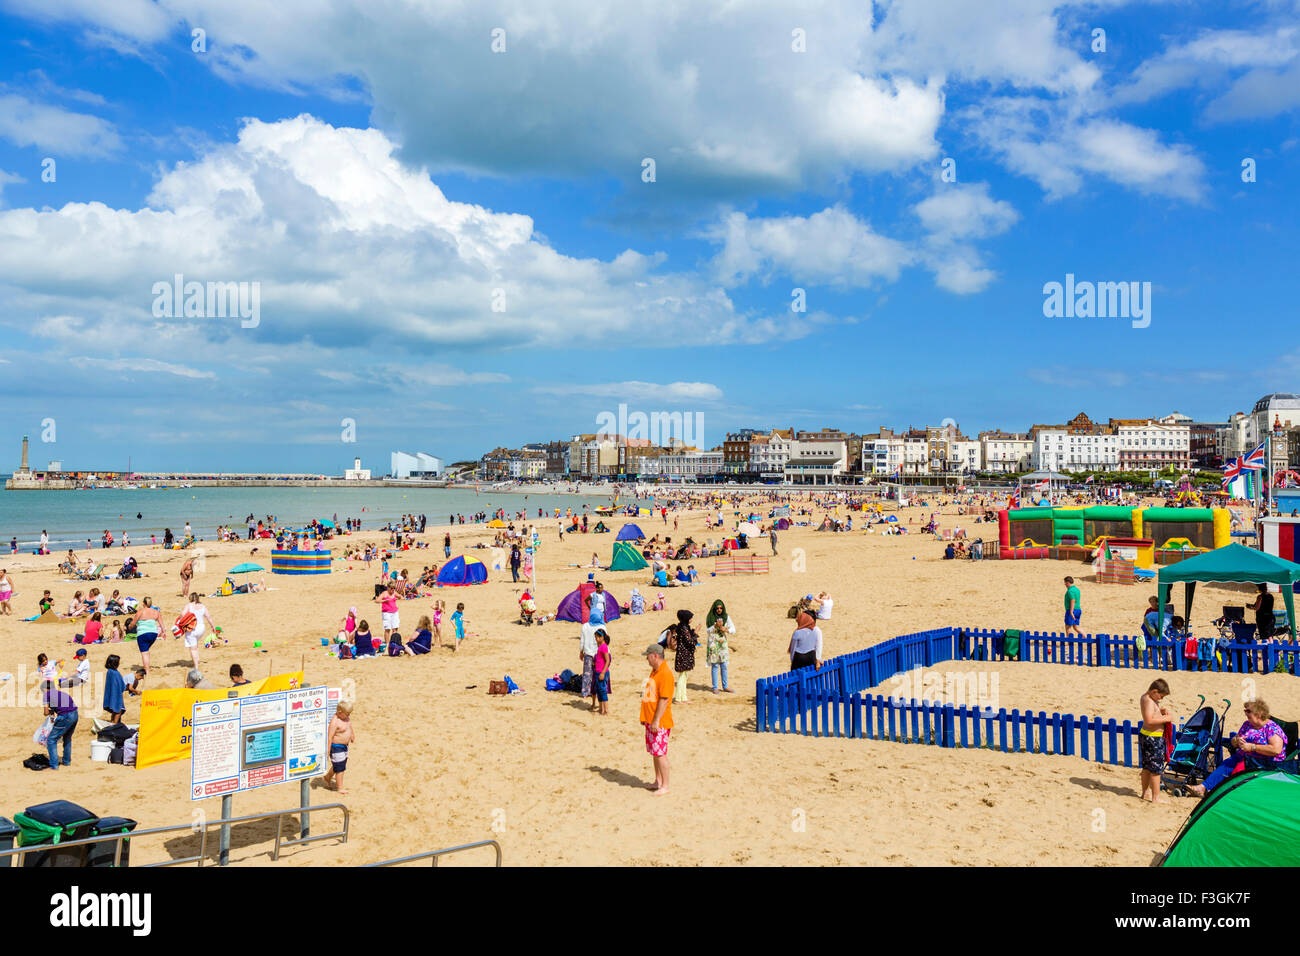 The beach in Margate, Kent, England, UK Stock Photo